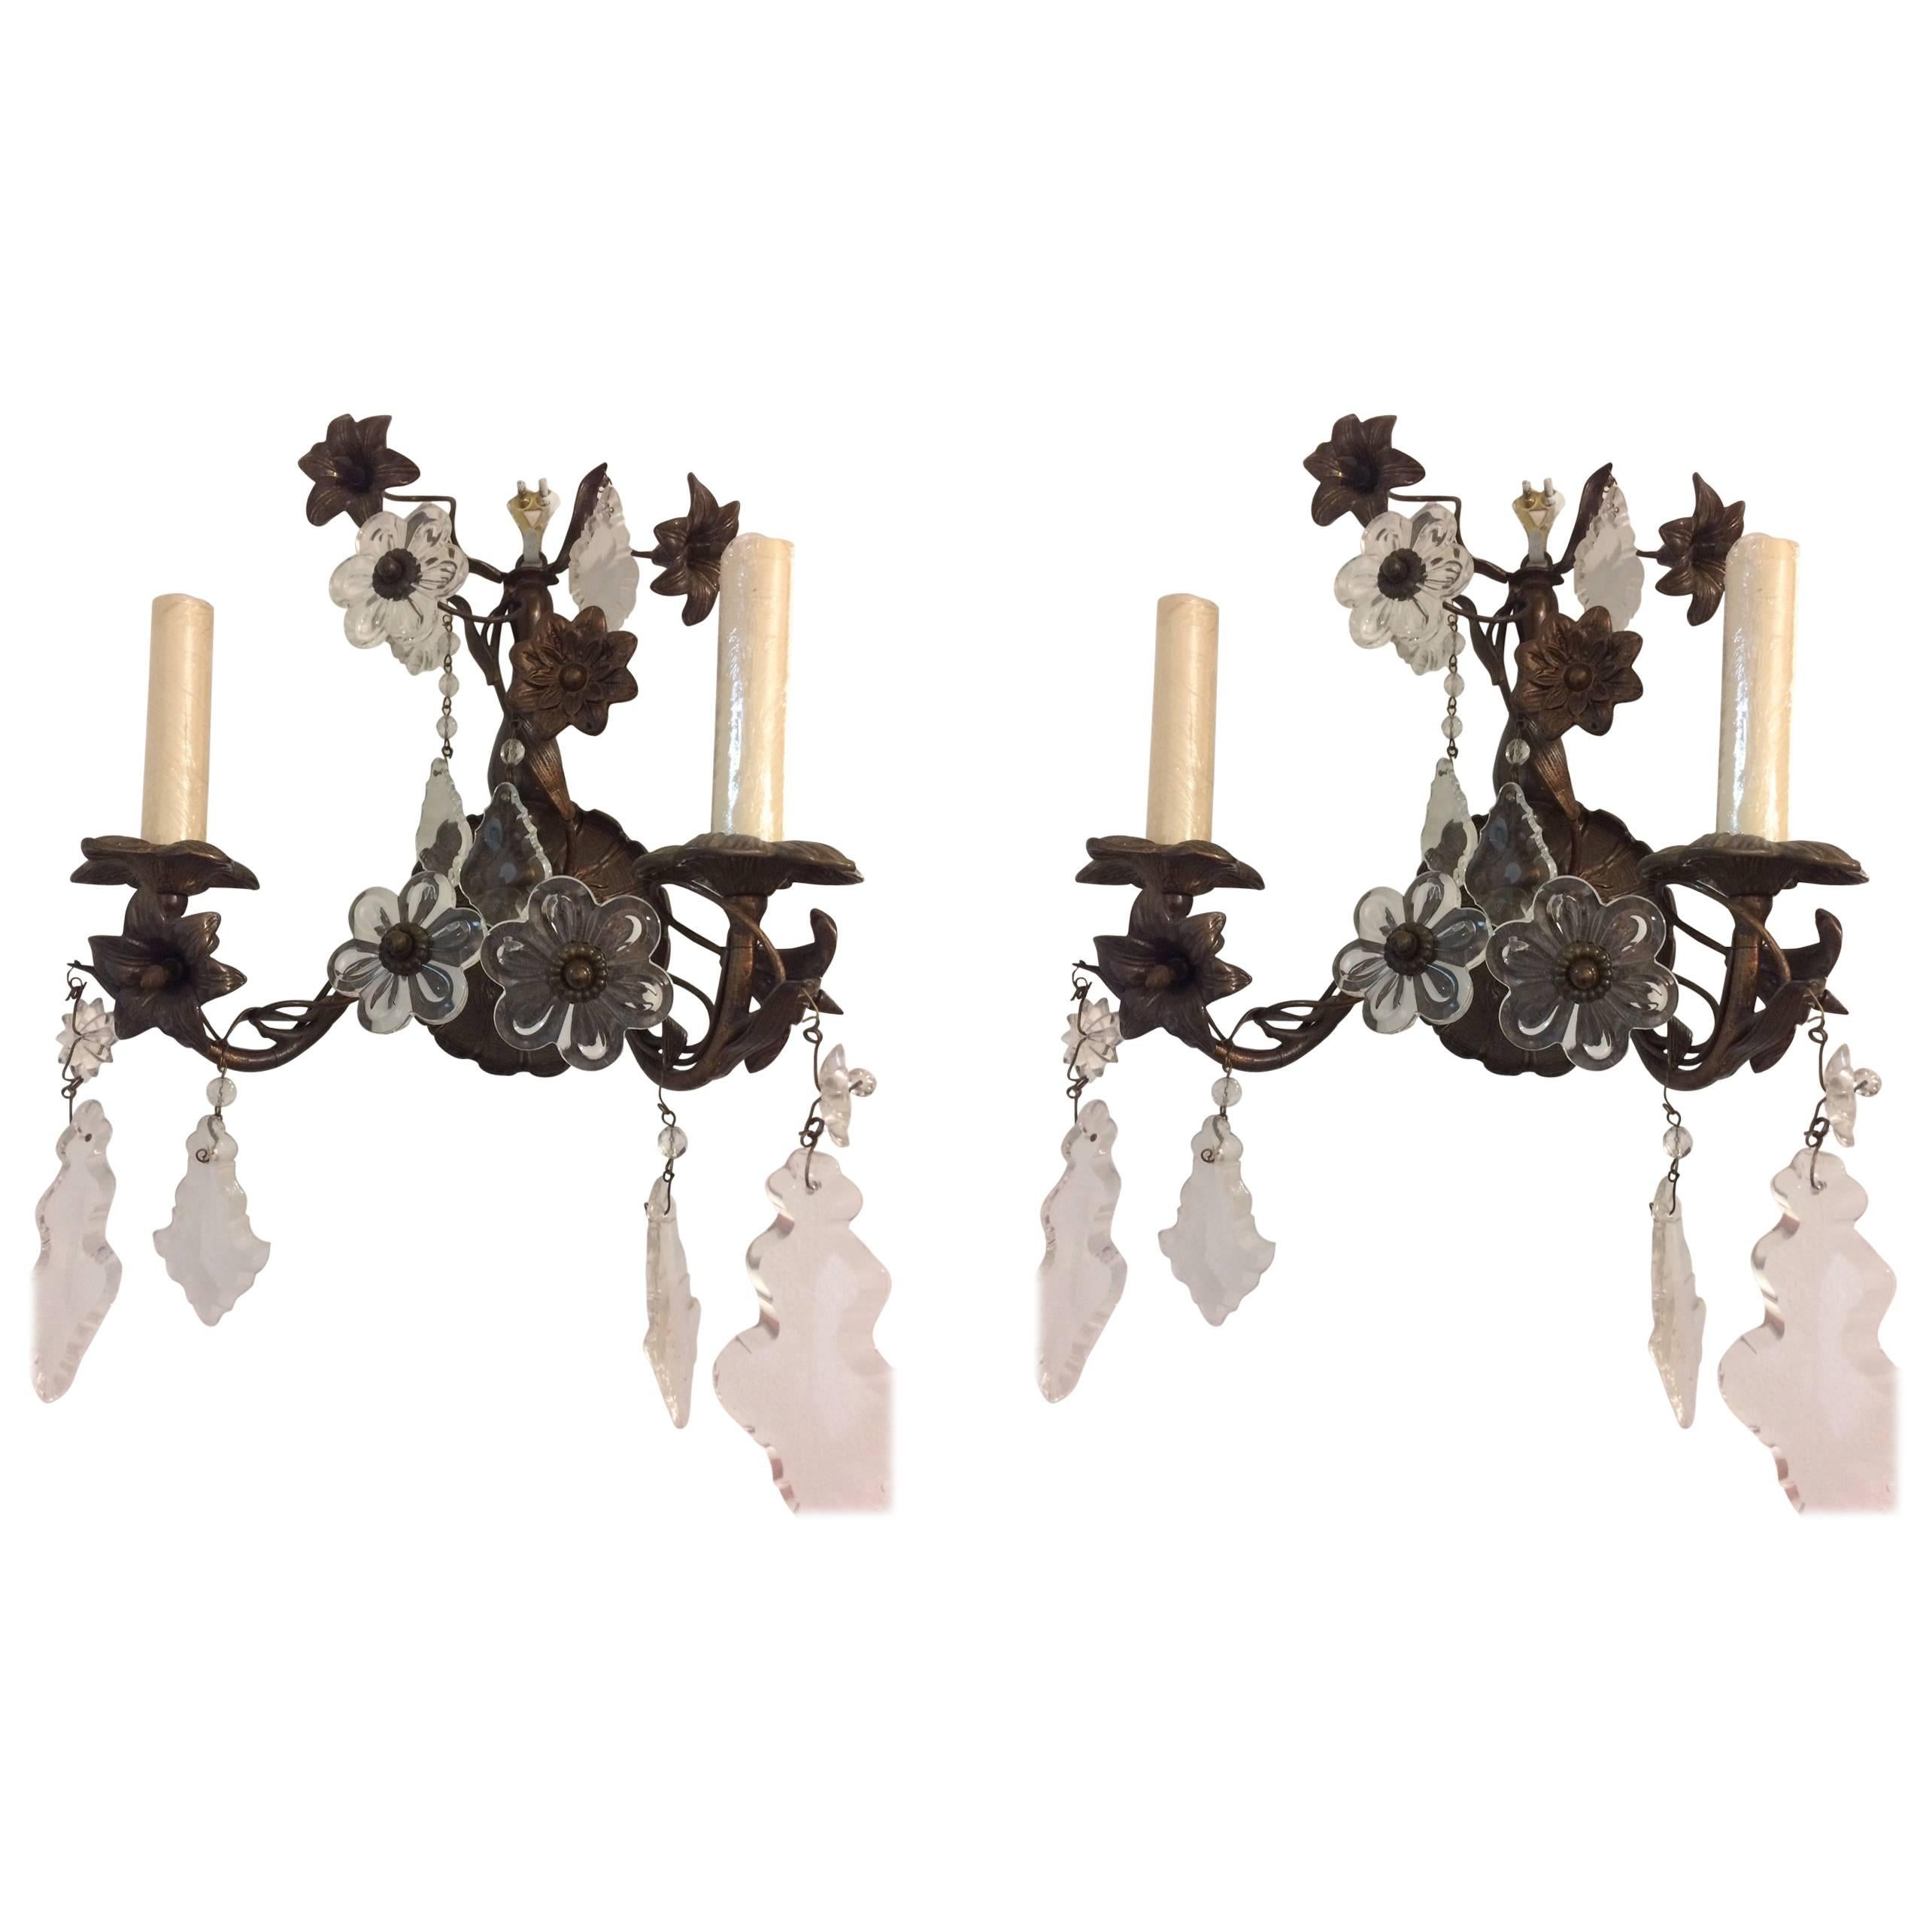 Pair of patined bronze two lights sconces with molded floral and foliage motif.

Measure: 15